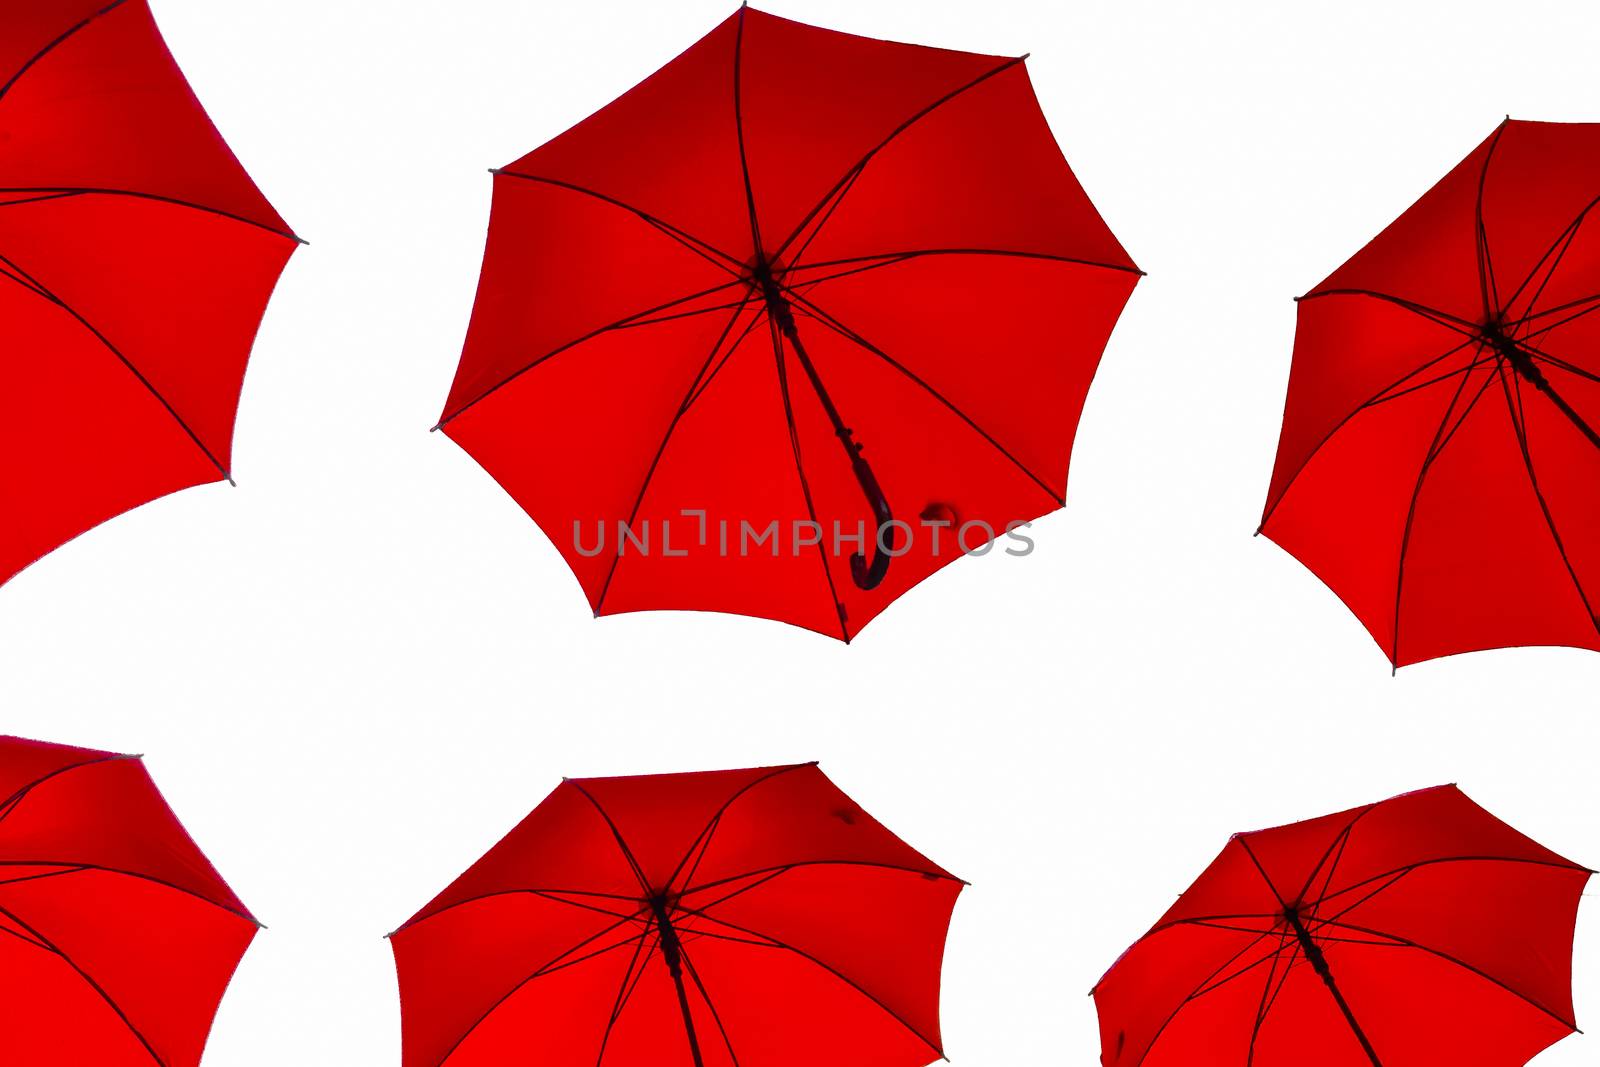 Red umbrellas on white background by asafaric